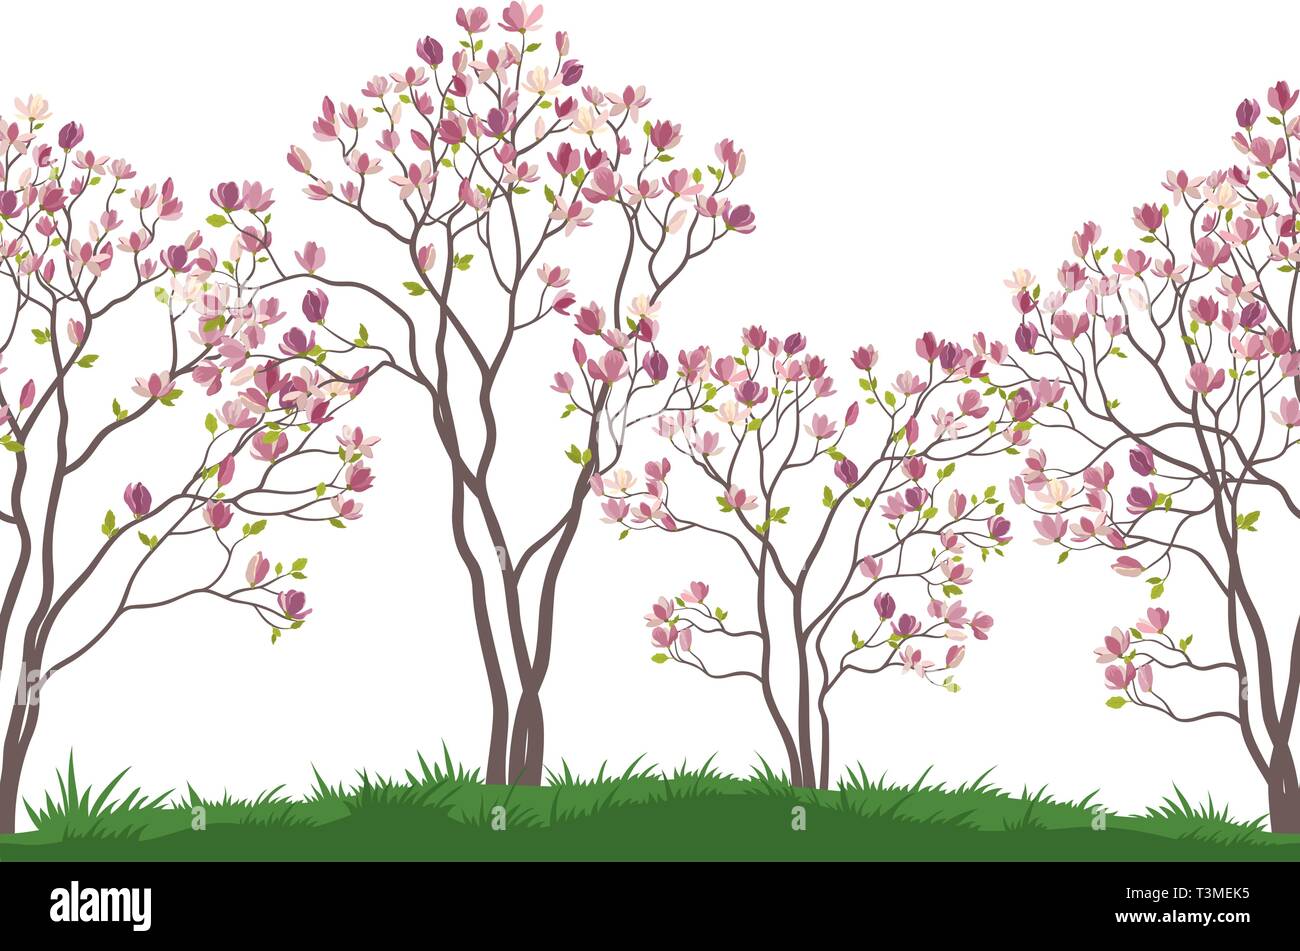 Horizontal Seamless Landscape, Spring Magnolia Trees with Pink Flowers and Green Leaves on Green Grass. Vector Stock Vector